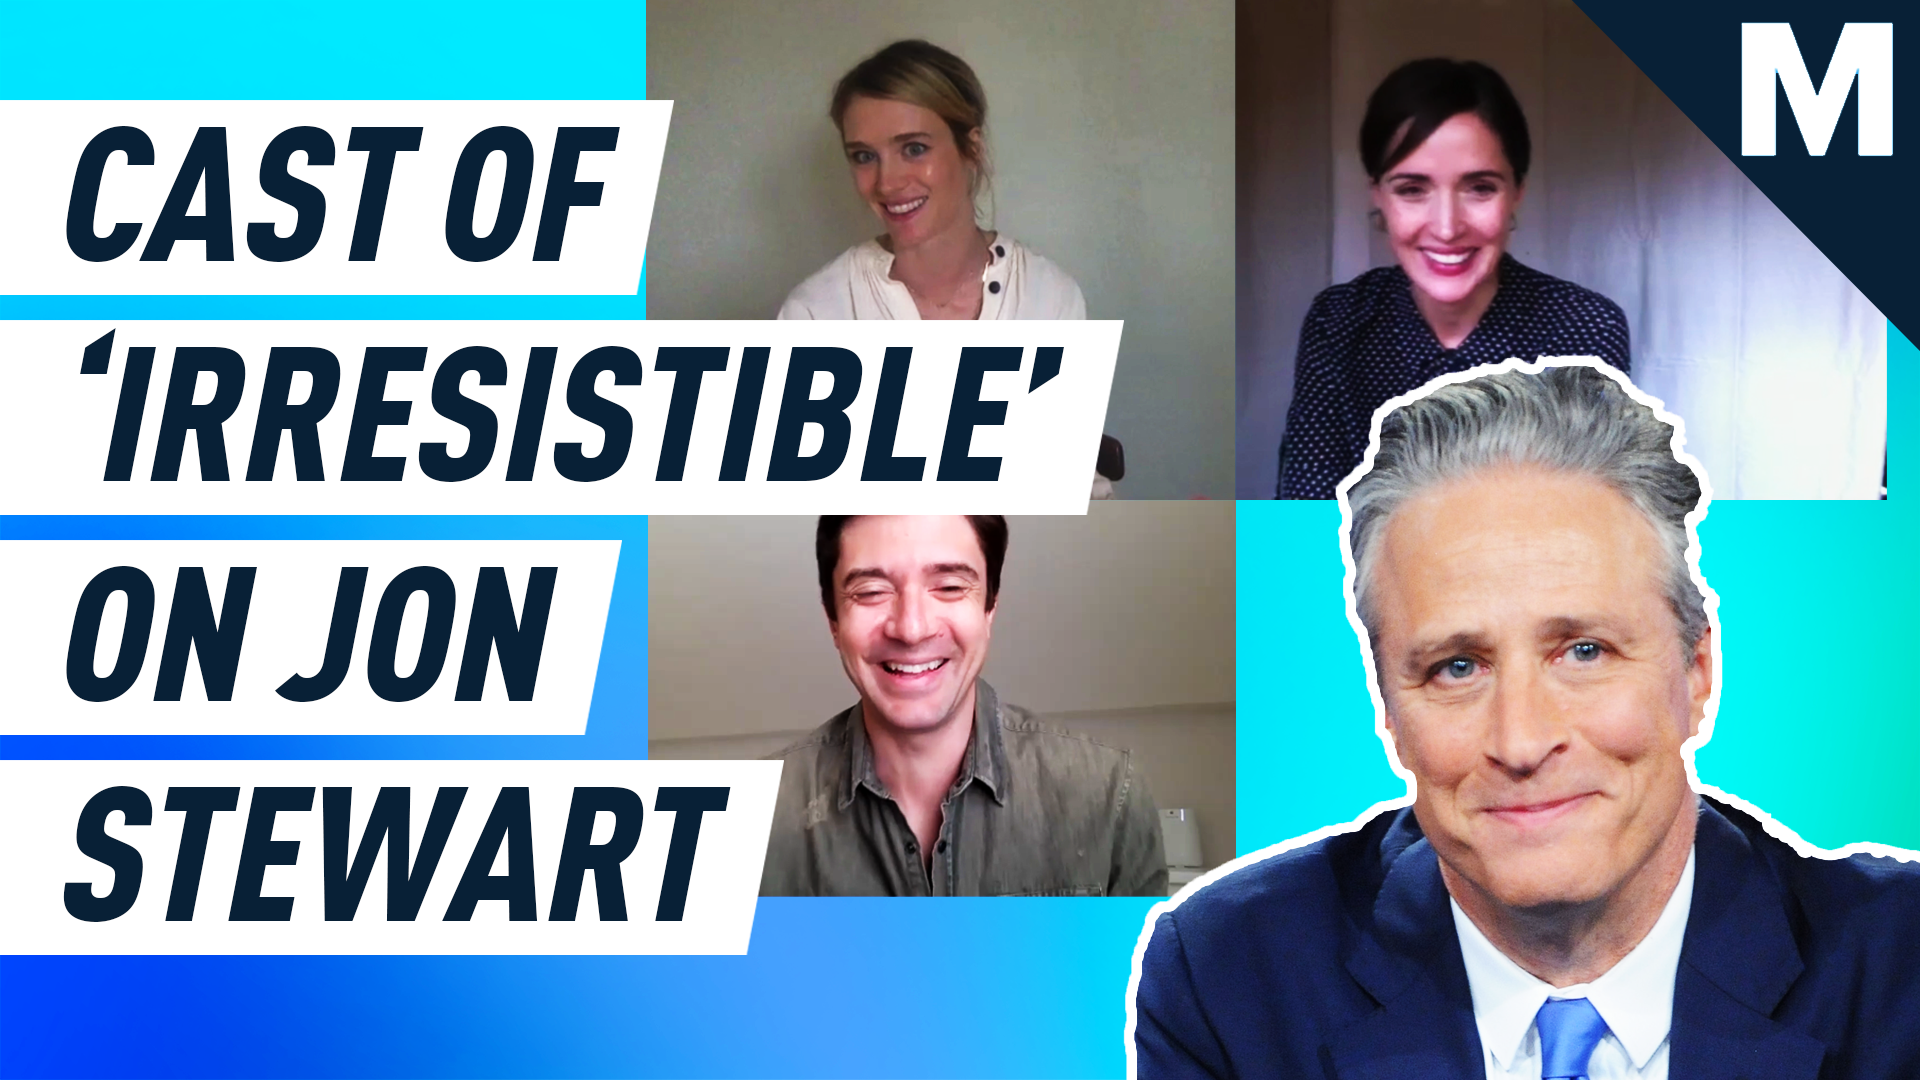 The cast of “Irresistible” rave about their director, Jon Stewart